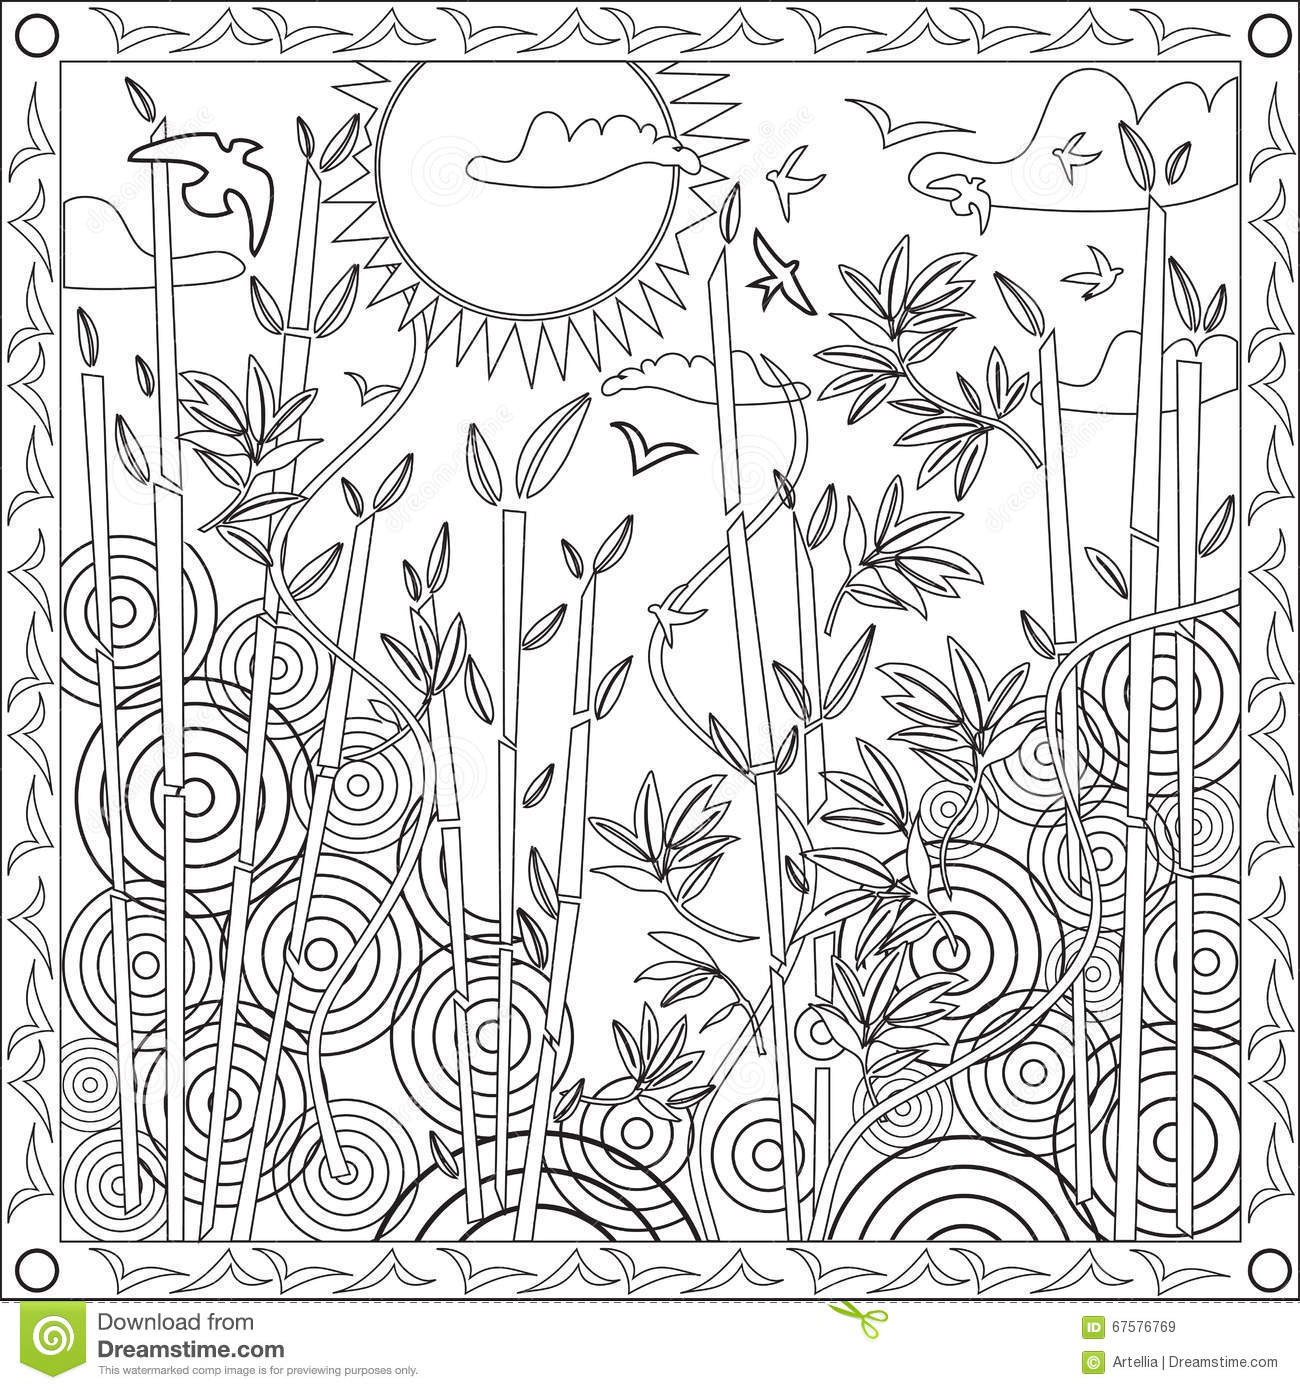 Sunset Coloring Pages For Adults
 Sunset Coloring Pages For Adults to Pin on